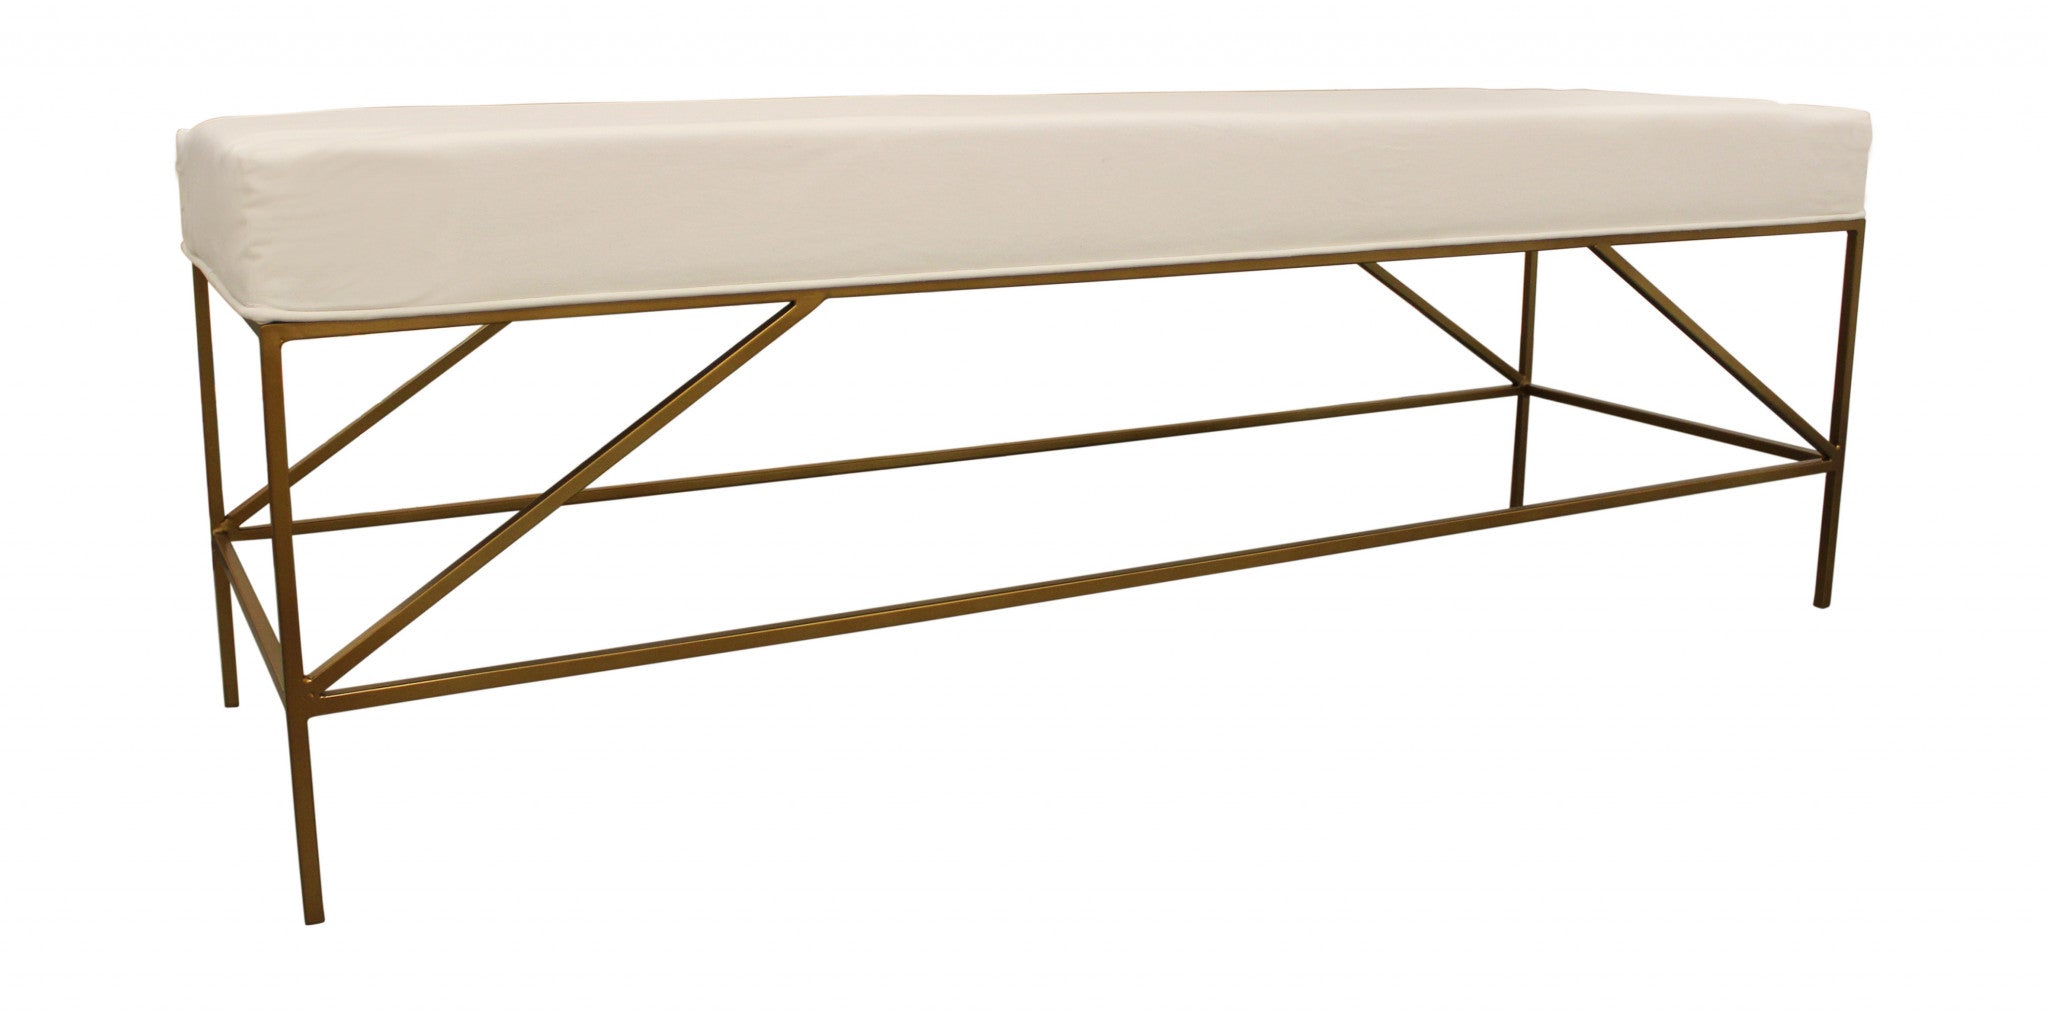 58" Ivory And Gold 100% Linen Upholstered Entryway Bench